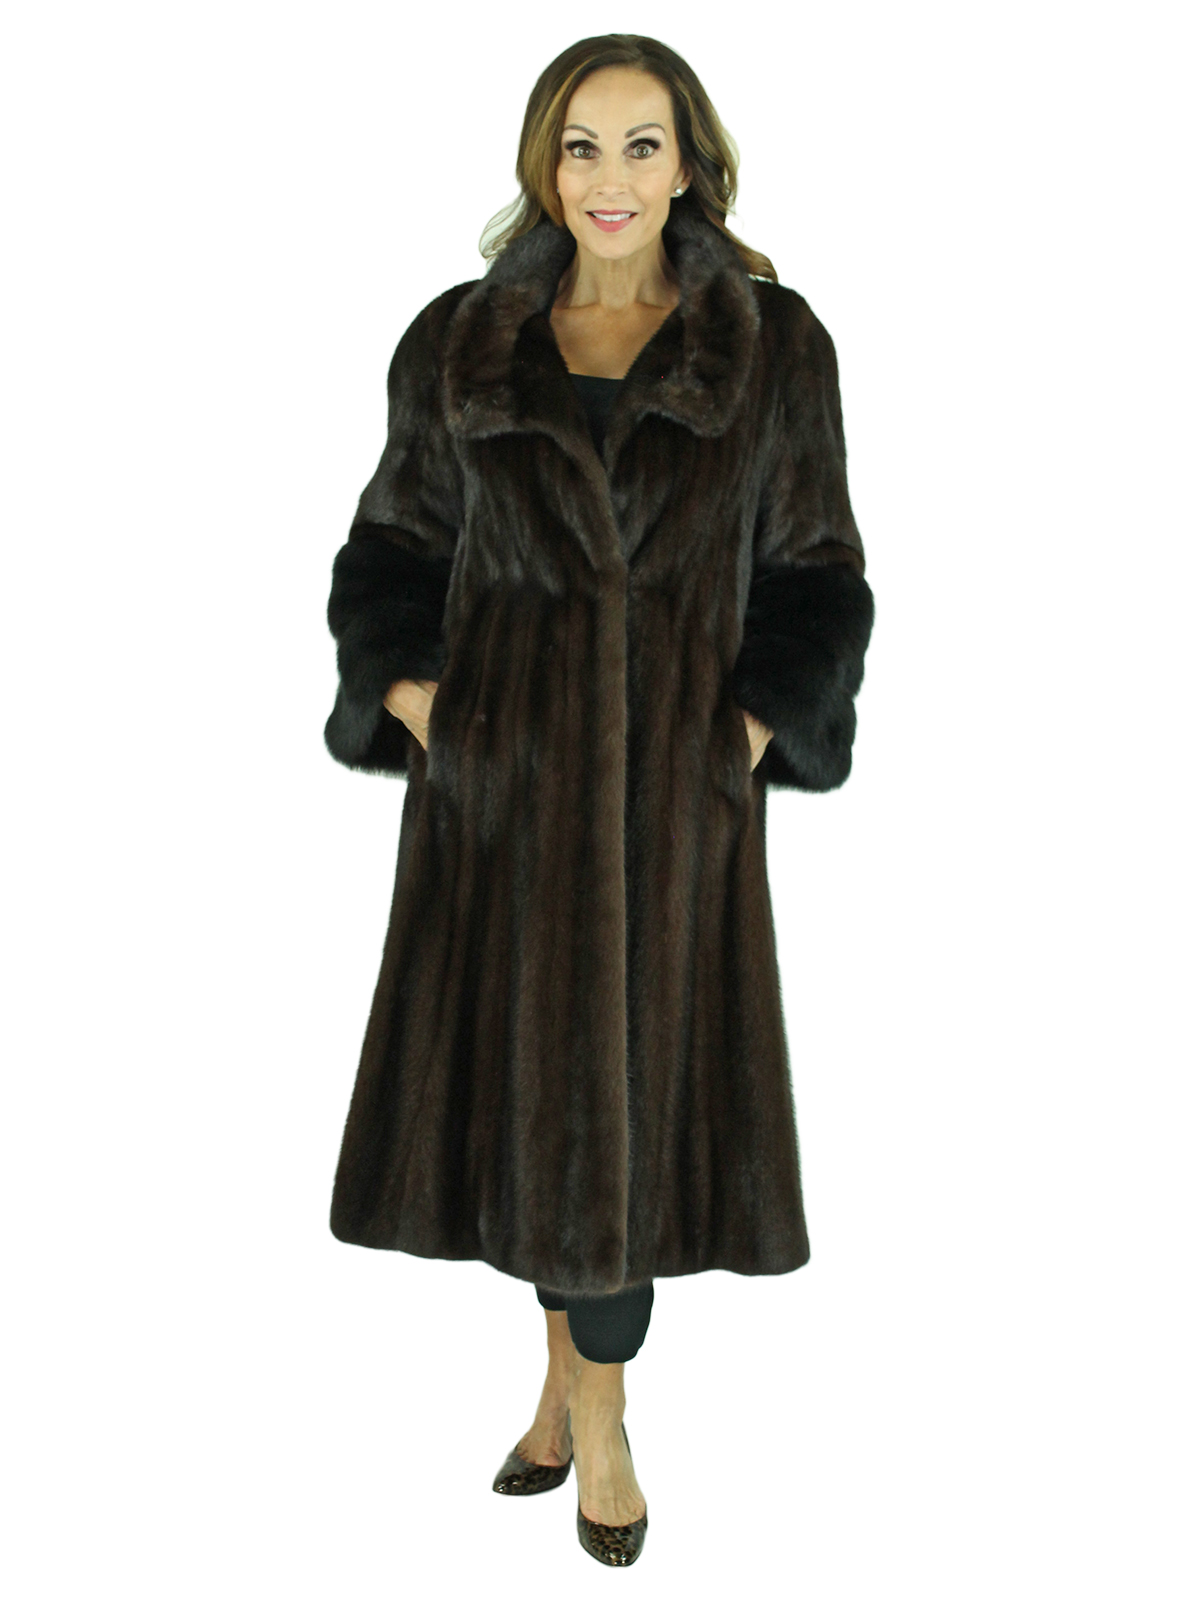 Mahogany Female Mink Fur Coat with Dyed Sable Cuffs - Women's Fur Coat ...